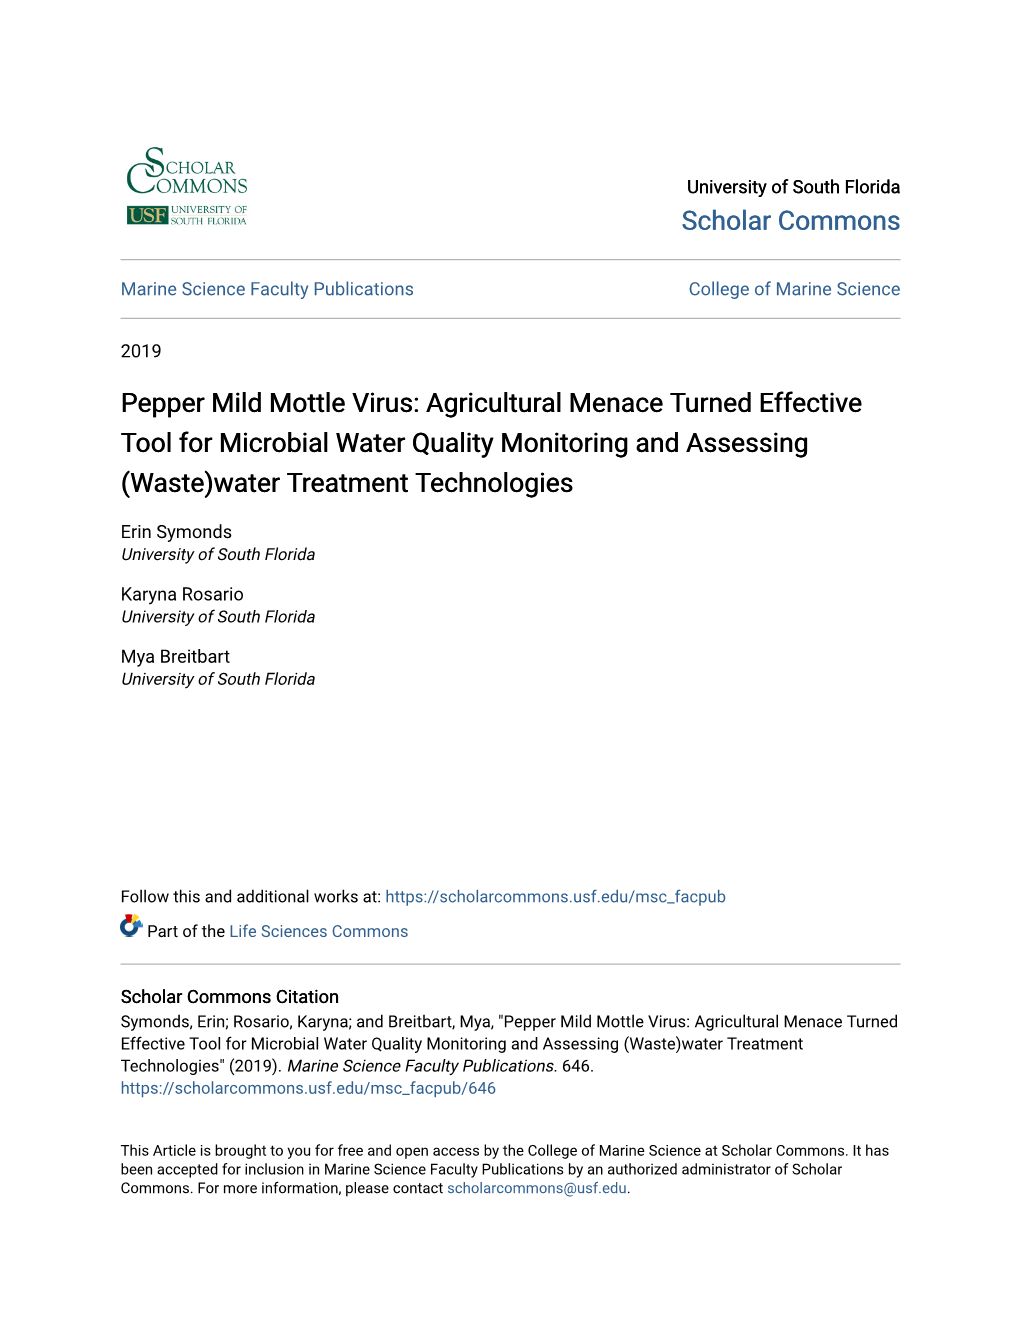 Pepper Mild Mottle Virus: Agricultural Menace Turned Effective Tool for Microbial Water Quality Monitoring and Assessing (Waste)Water Treatment Technologies